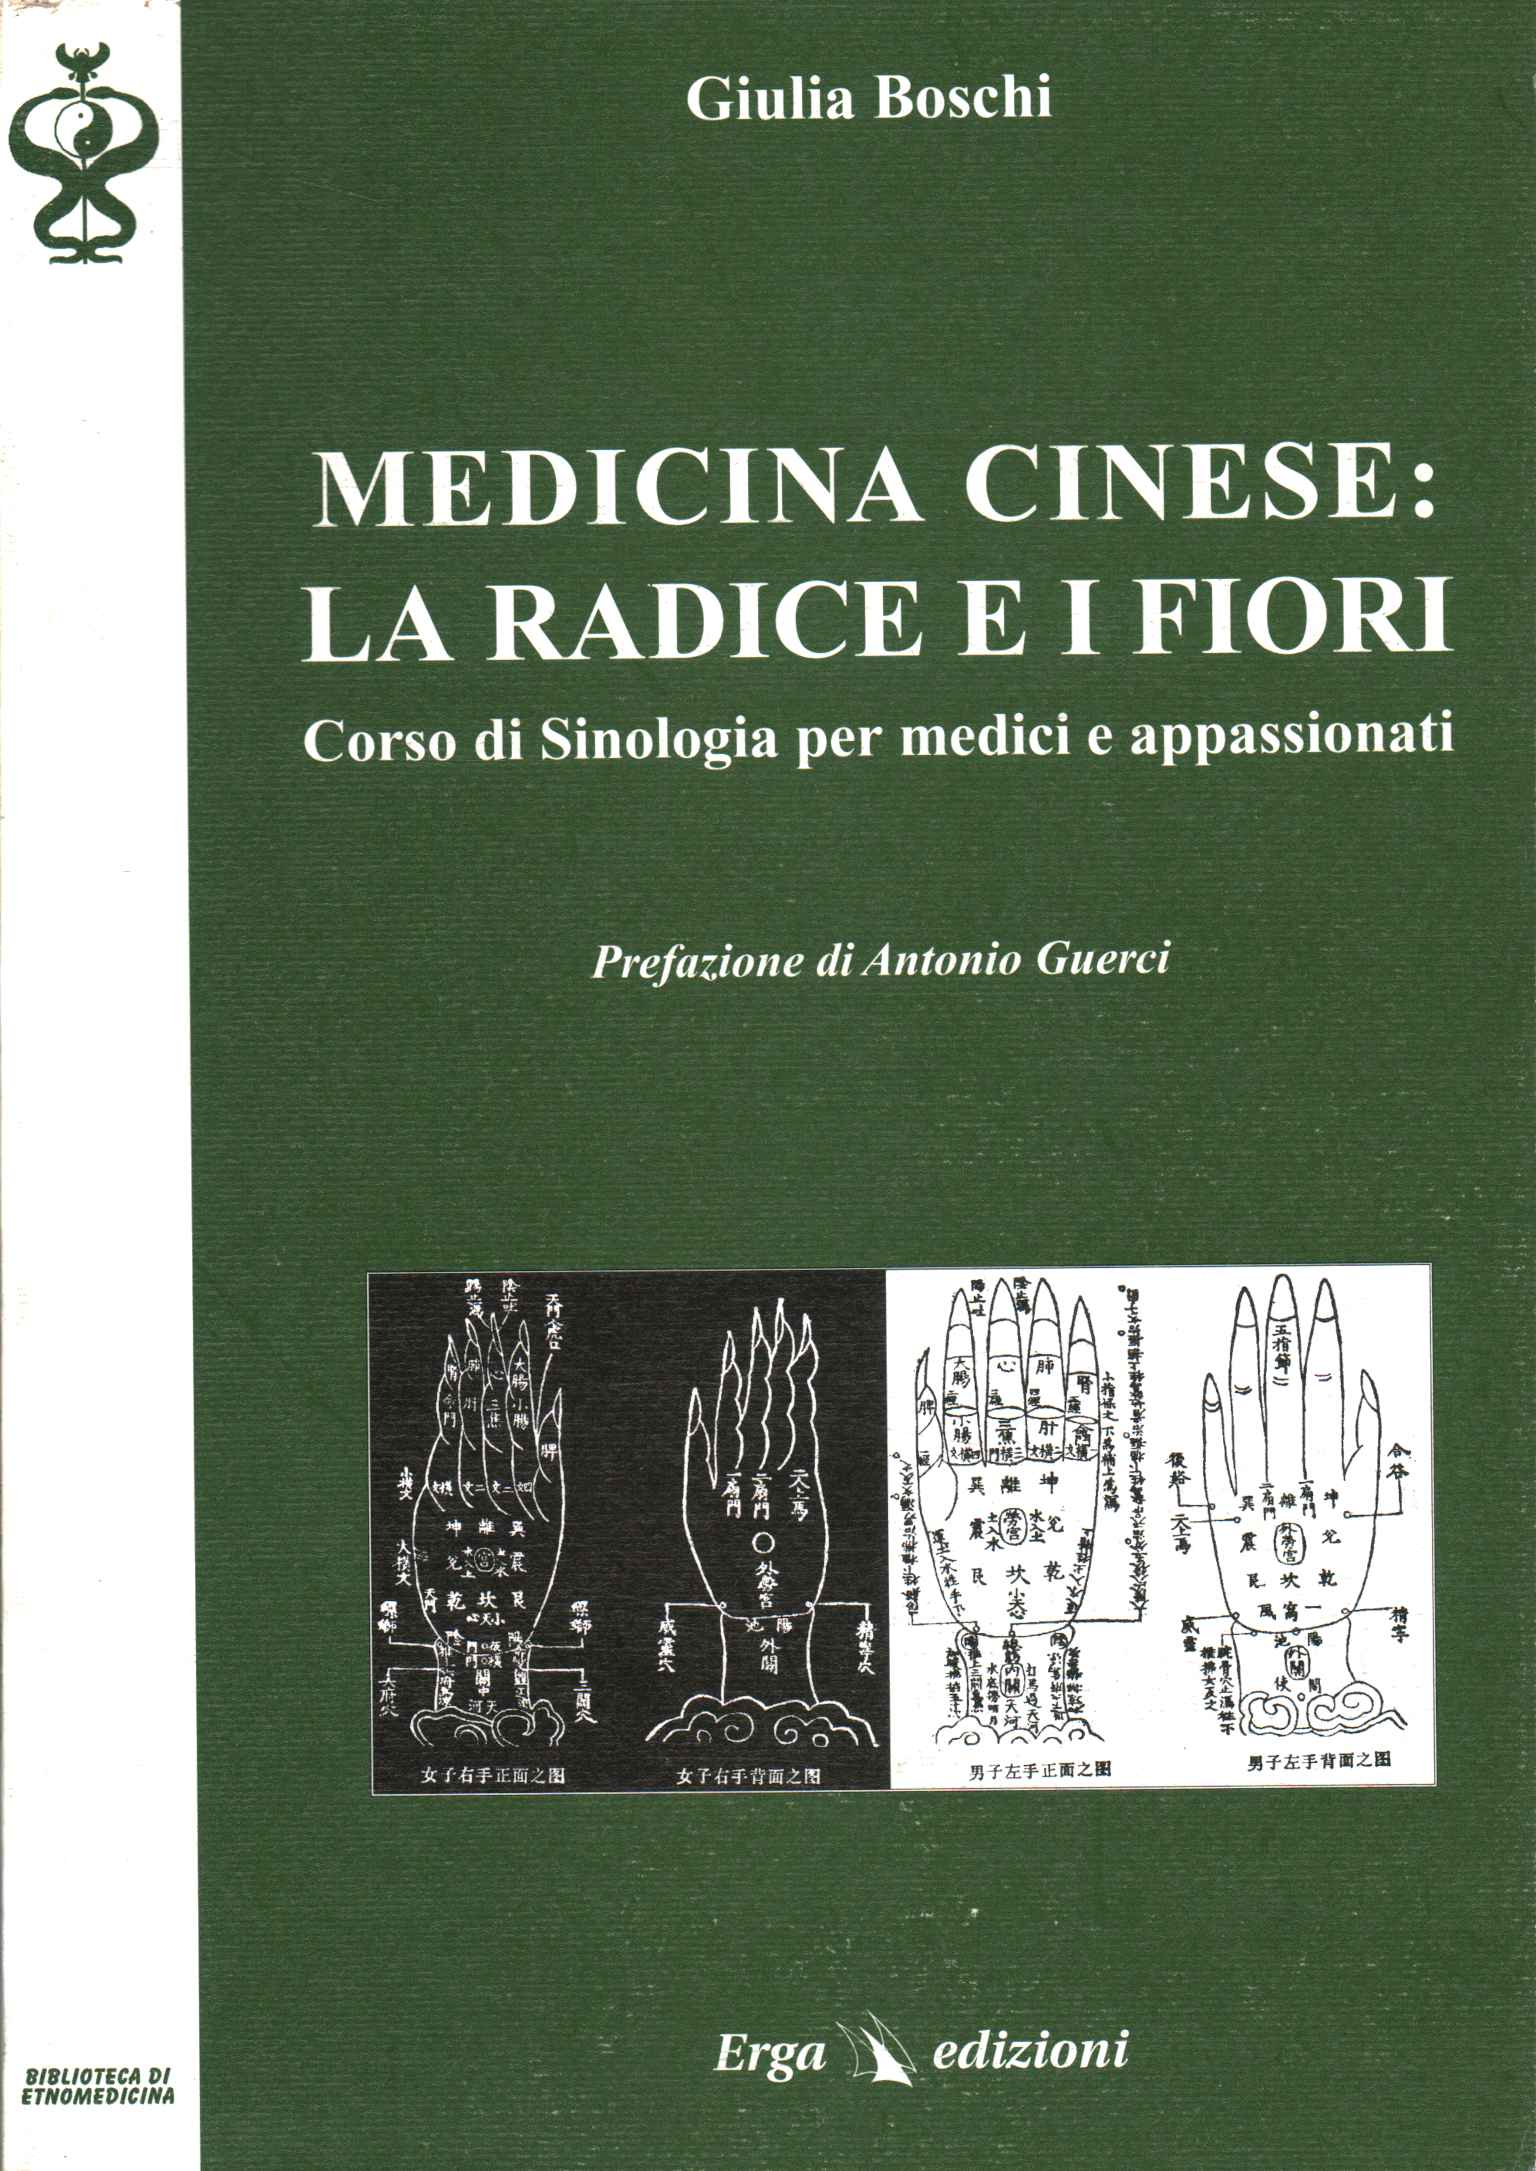 Chinese medicine: the root and the flowers.%,Chinese medicine: the root and the flowers.%,Chinese medicine: the root and the flowers.%